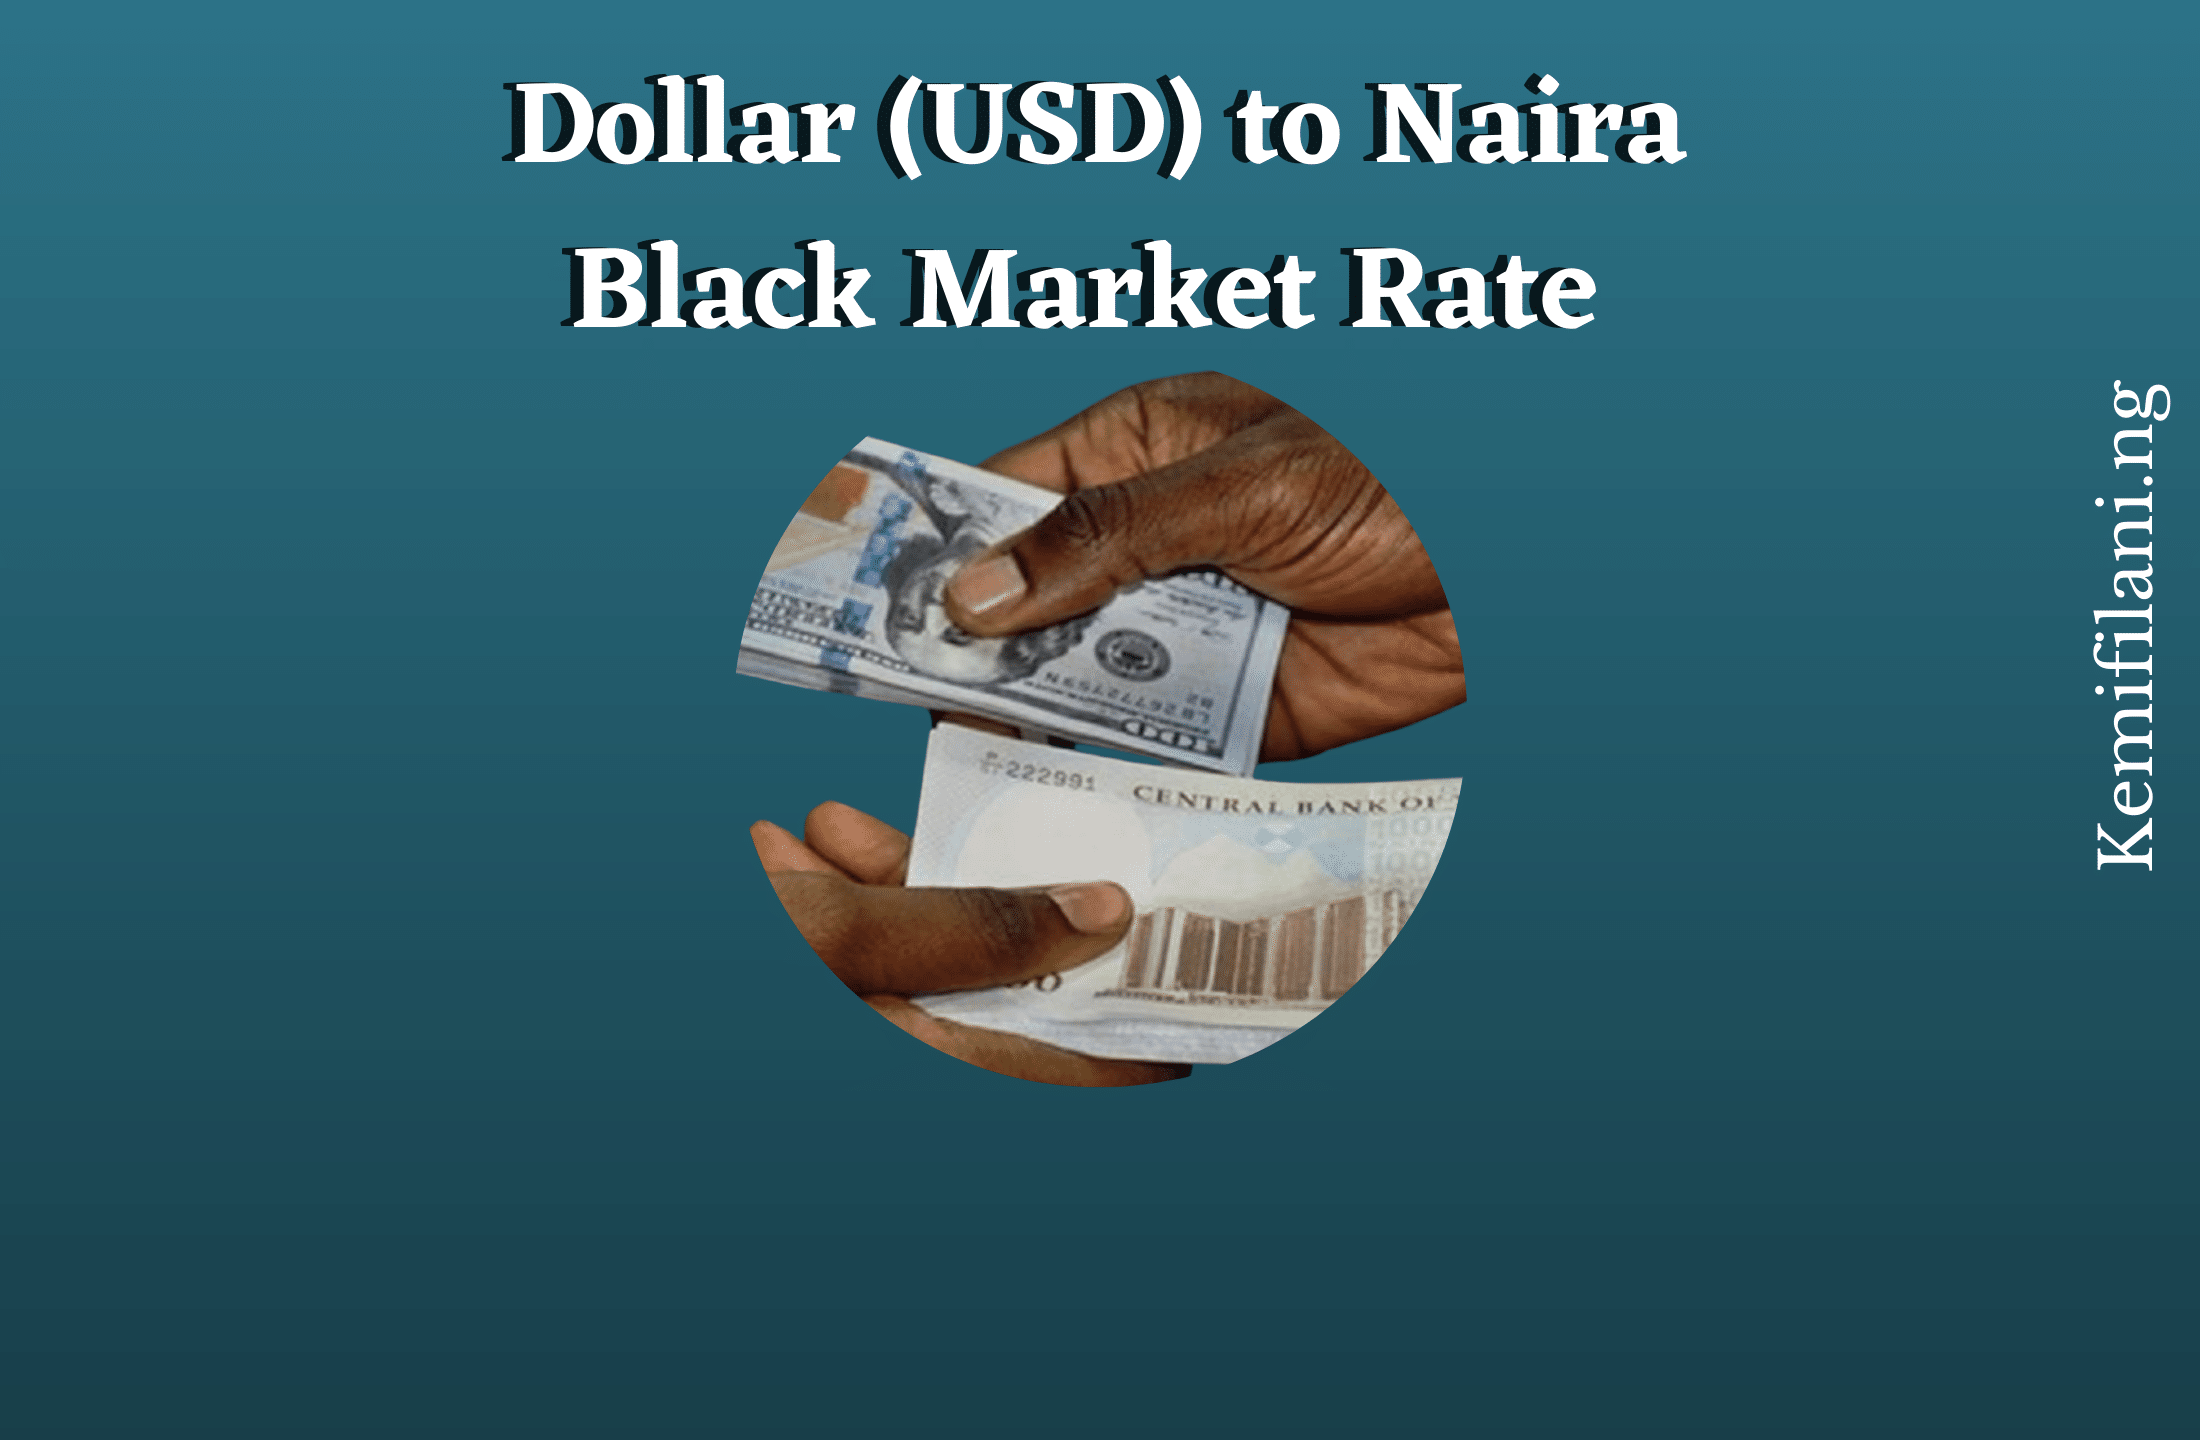 Dollar to Naira Black Market Rate today – 21st August 2022